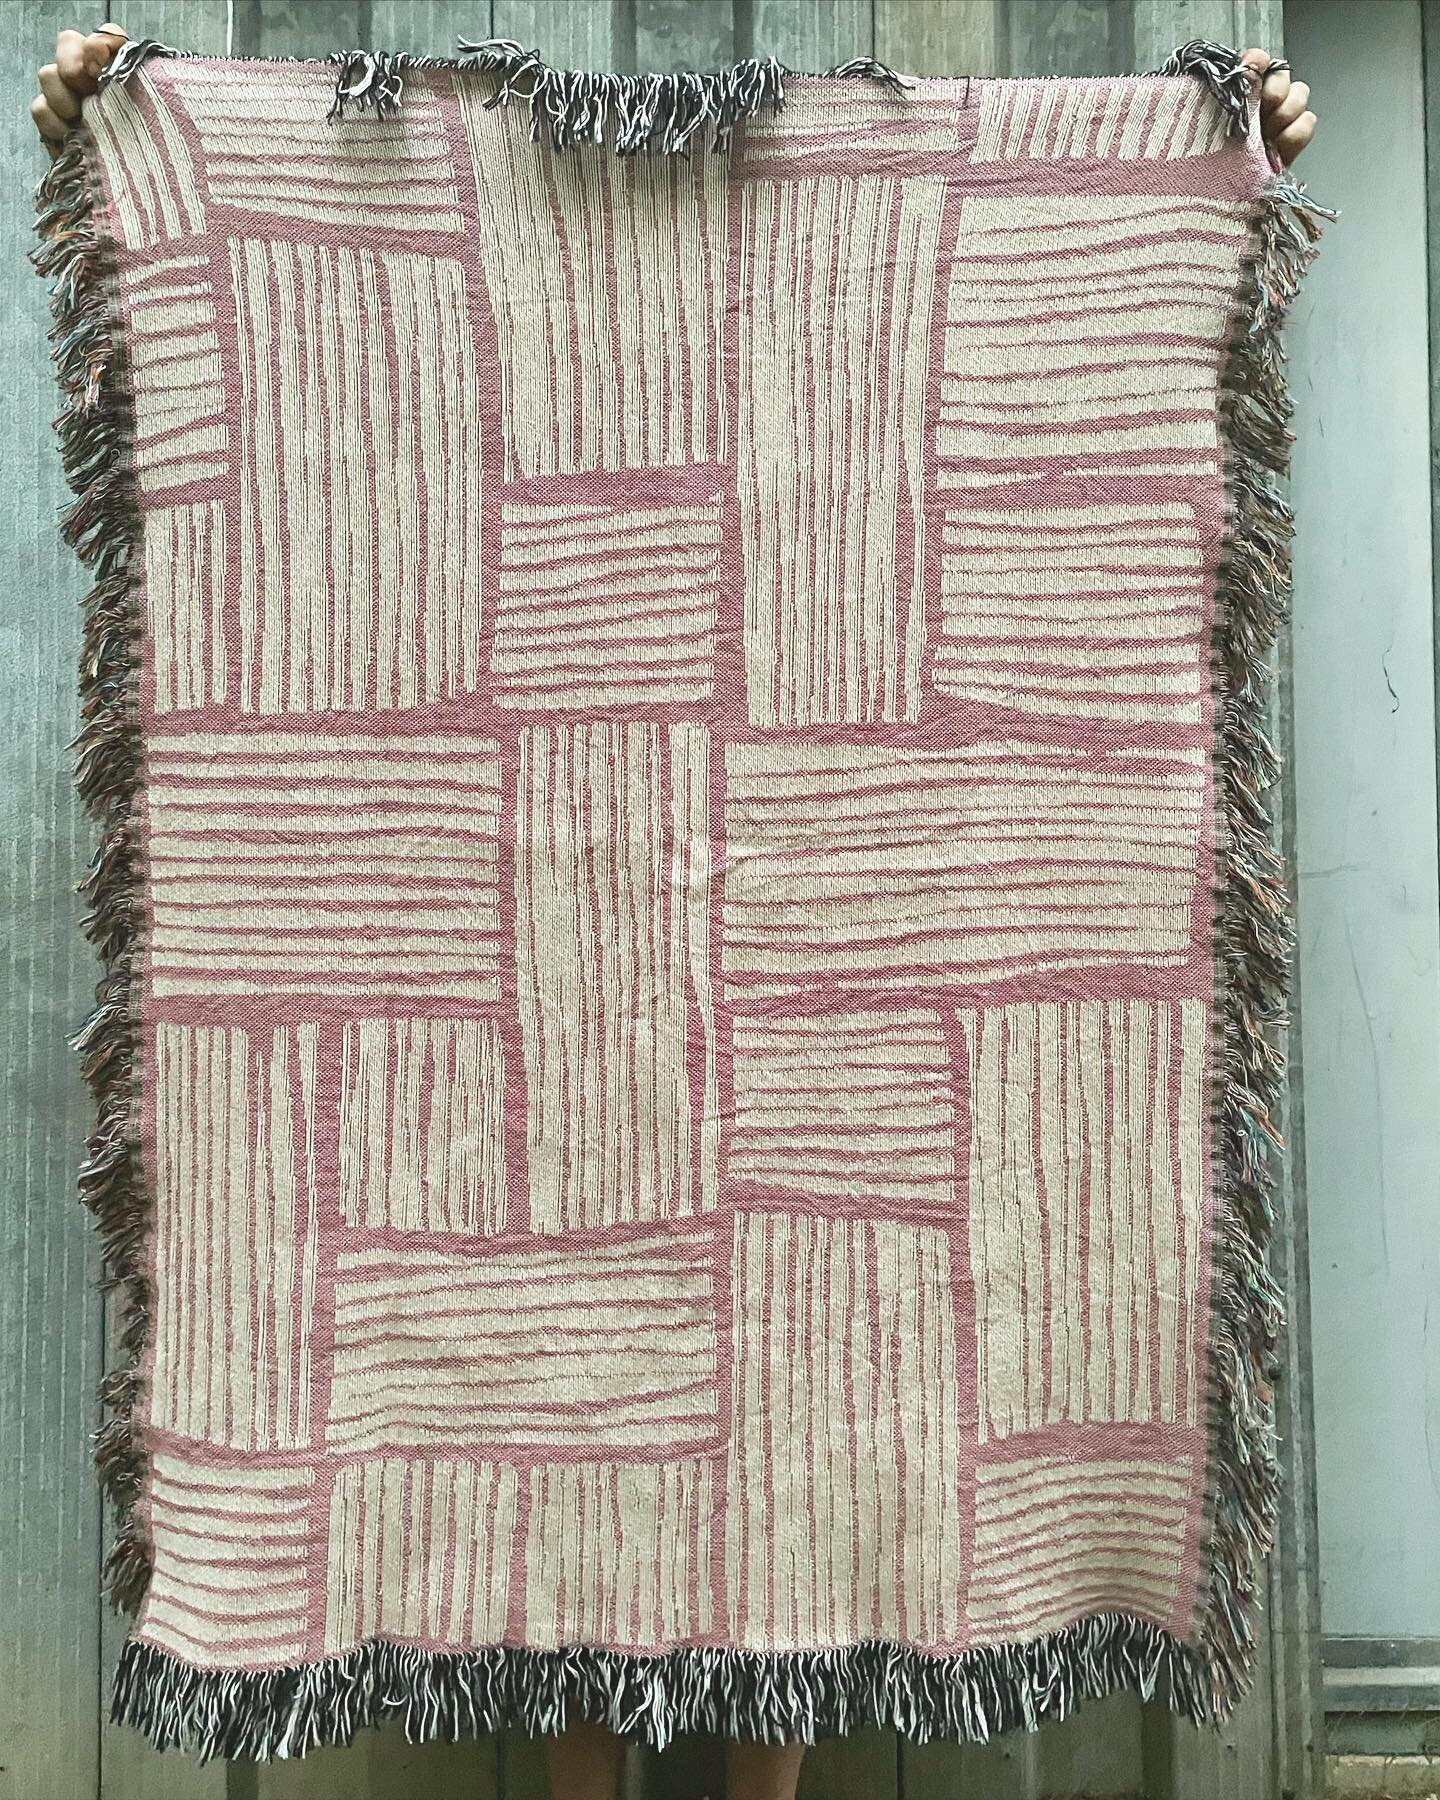 My original throw samples are here! Here is one that started as a drawing and ended as a cozy little blanket. 
#weaving #art #design #cozy #blanket #throw #fiberart #textiledesign #textiles